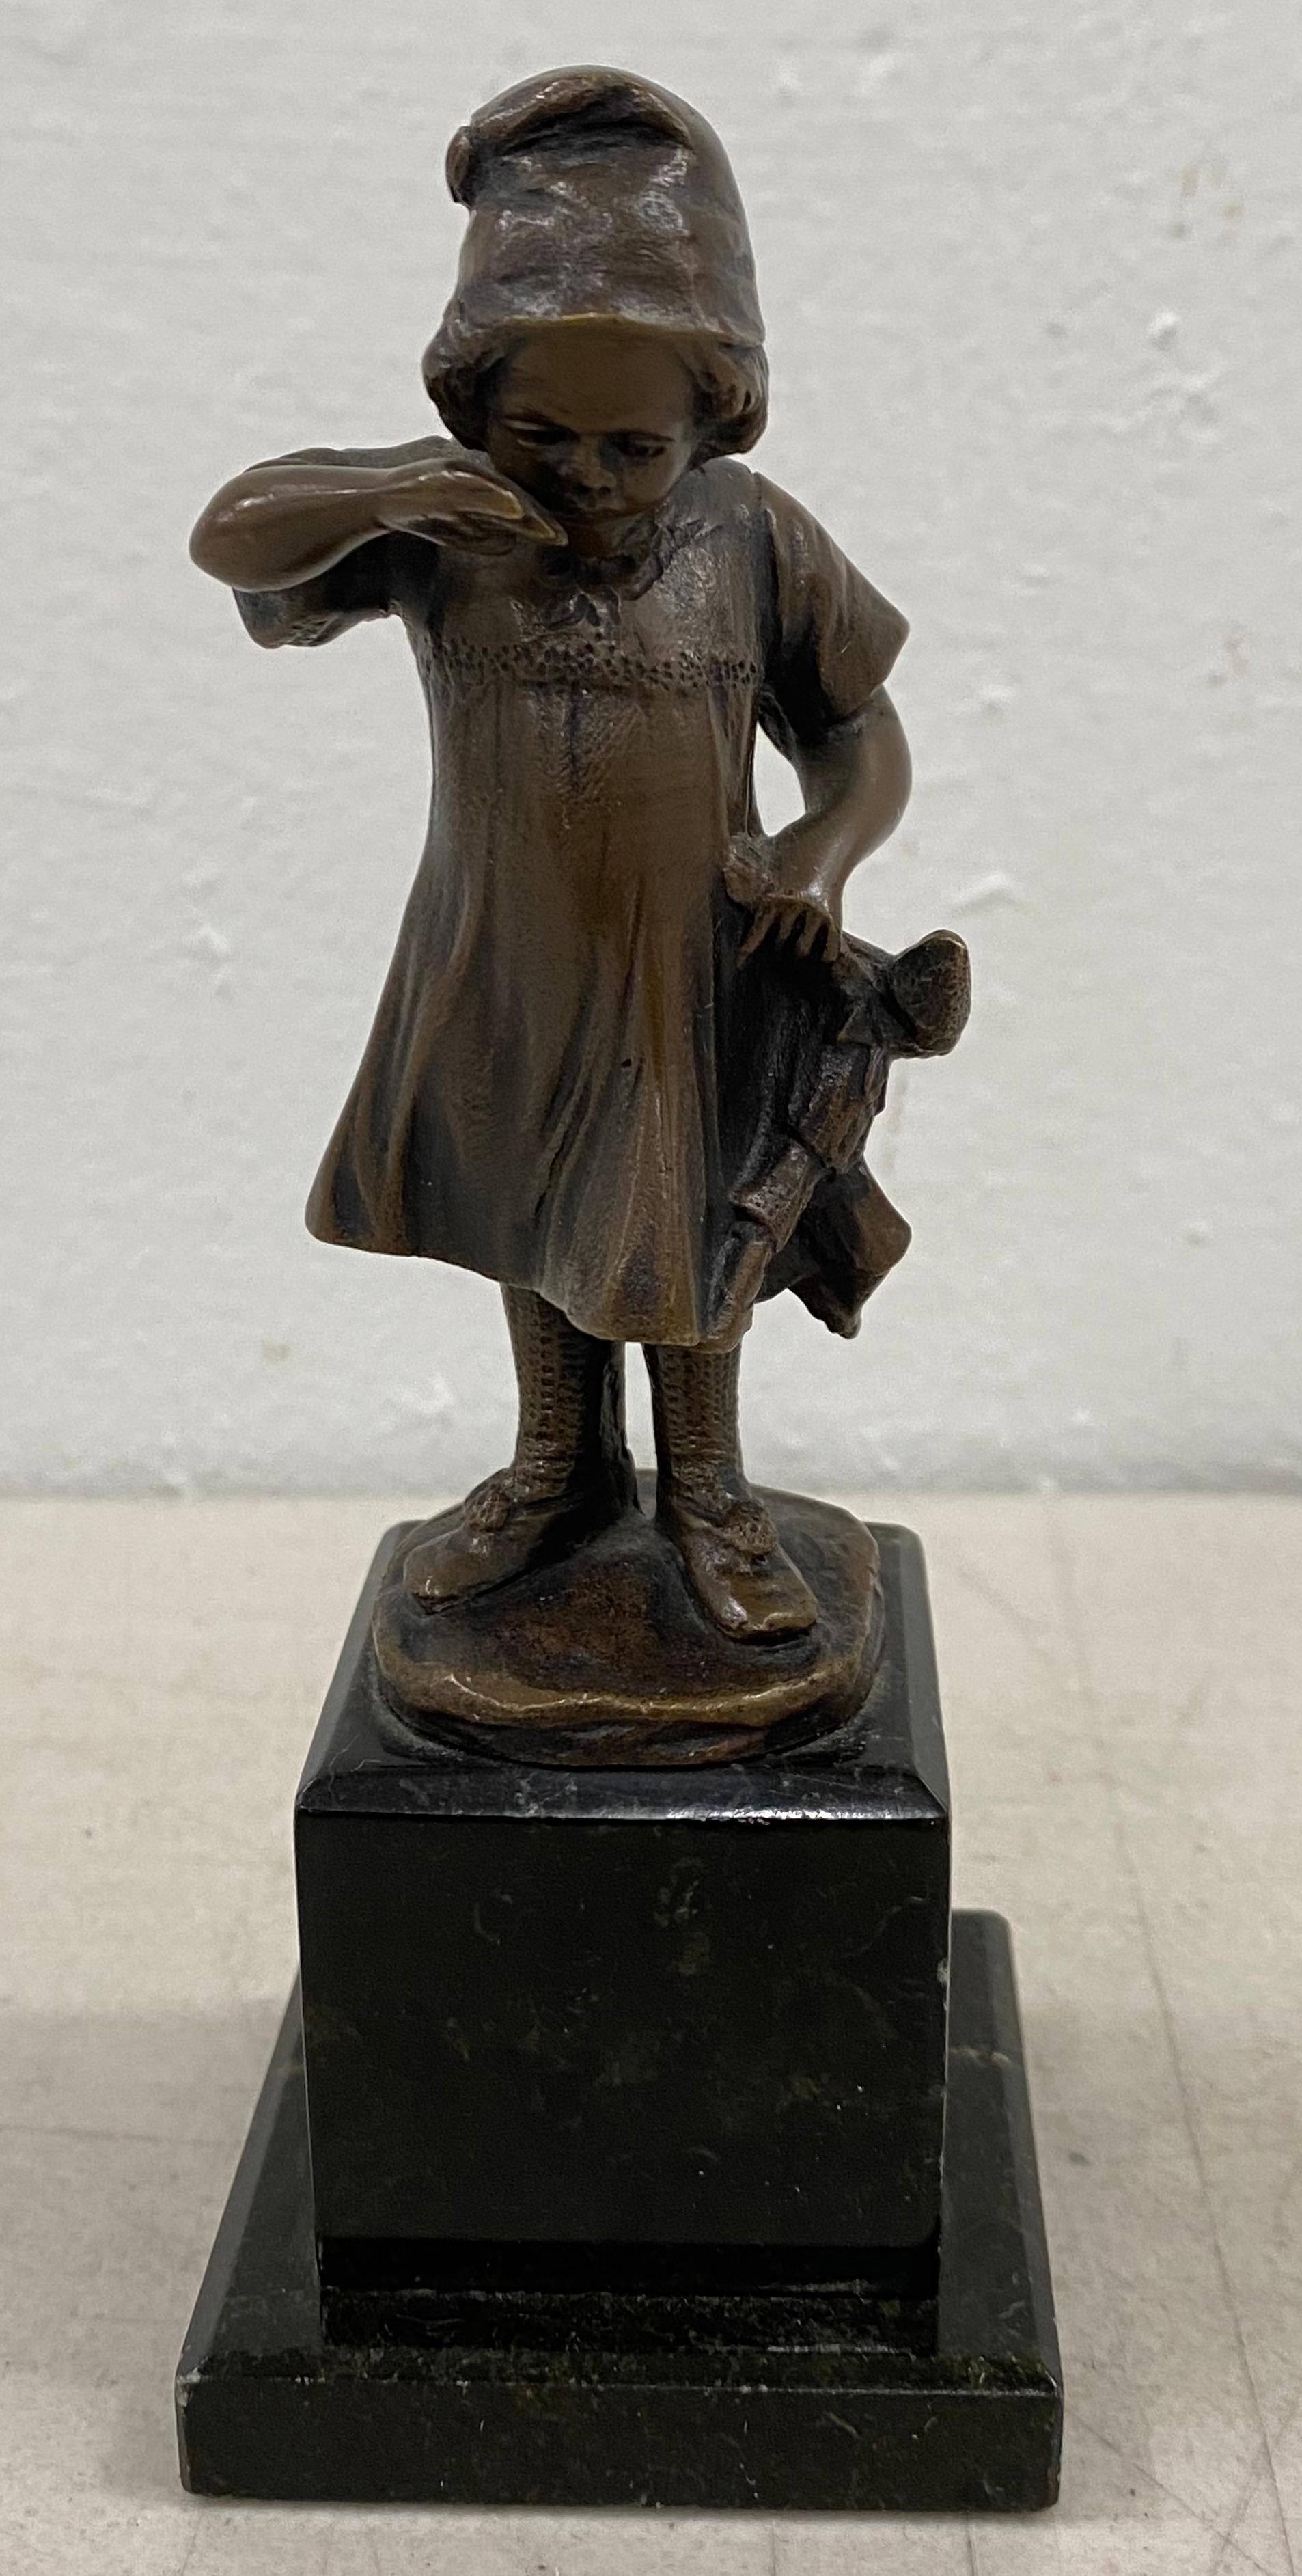 Unknown Figurative Sculpture - 19th Century Miniature Bronze Sculpture of a Young Girl Holding a Doll